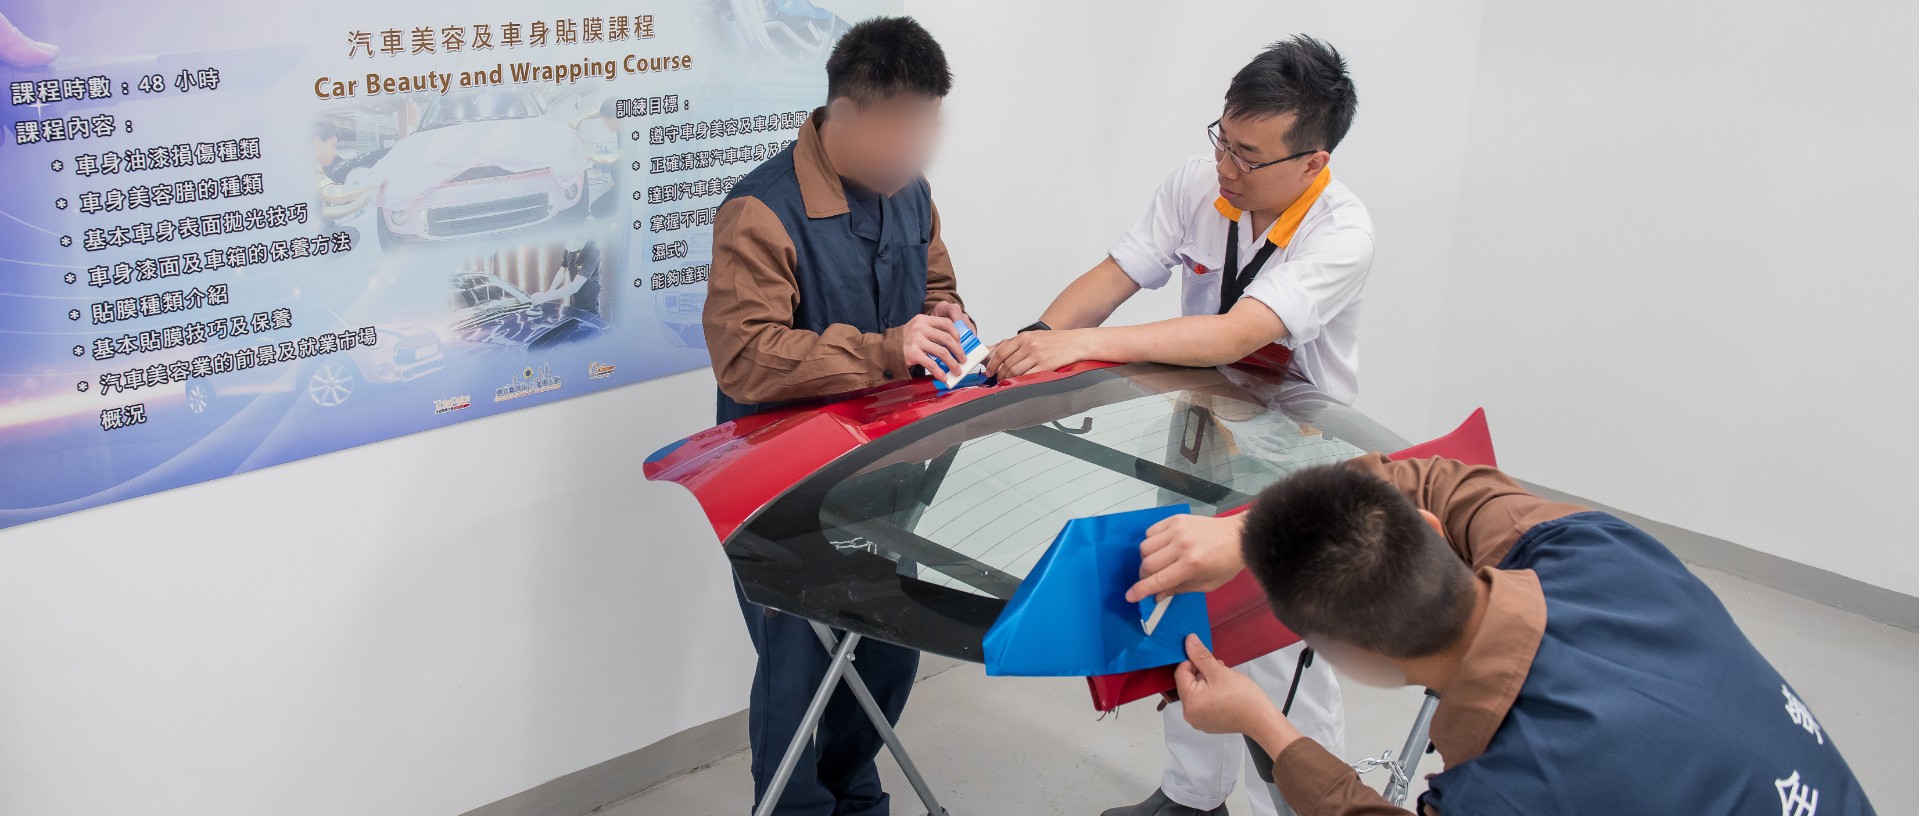 Persons in custody learn many practical skills from the Car Beauty and Wrapping Course.